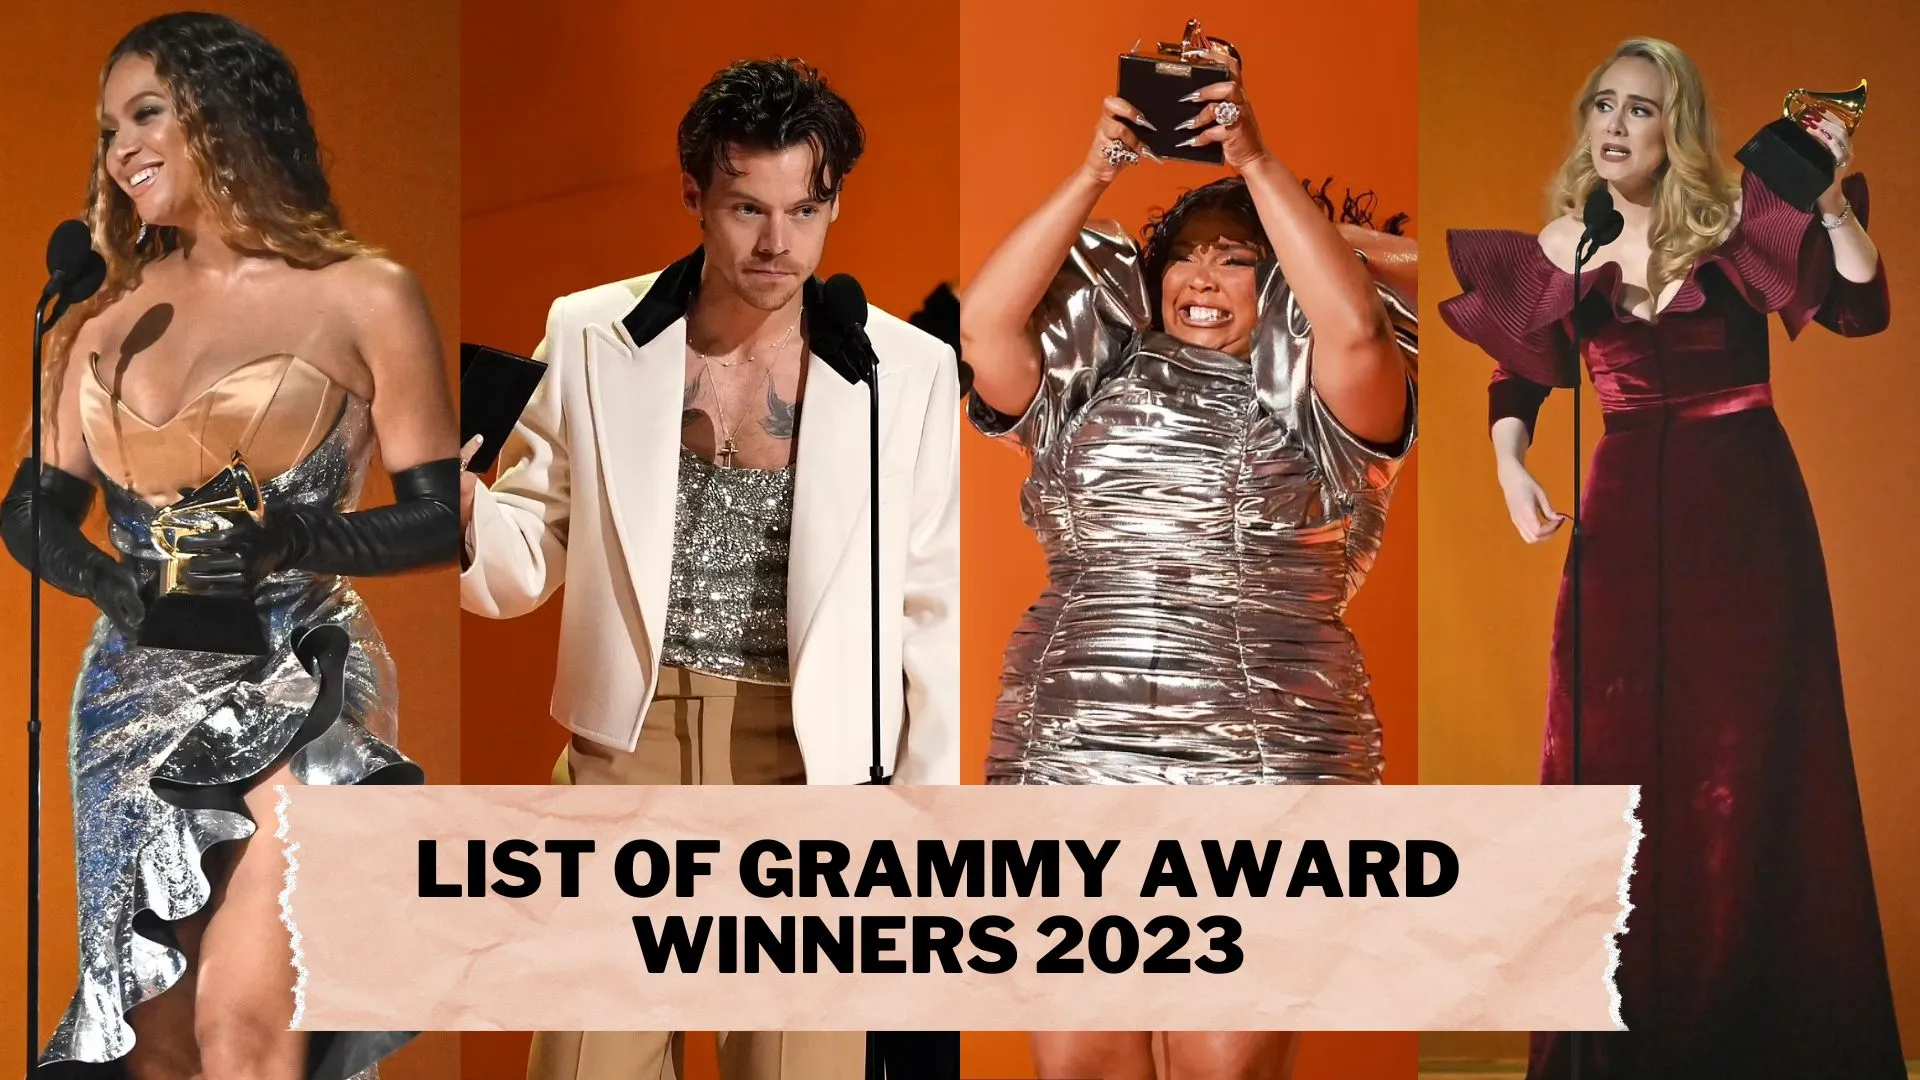 List of Grammy Award Winners 2023 (Image credit: Daily mail)